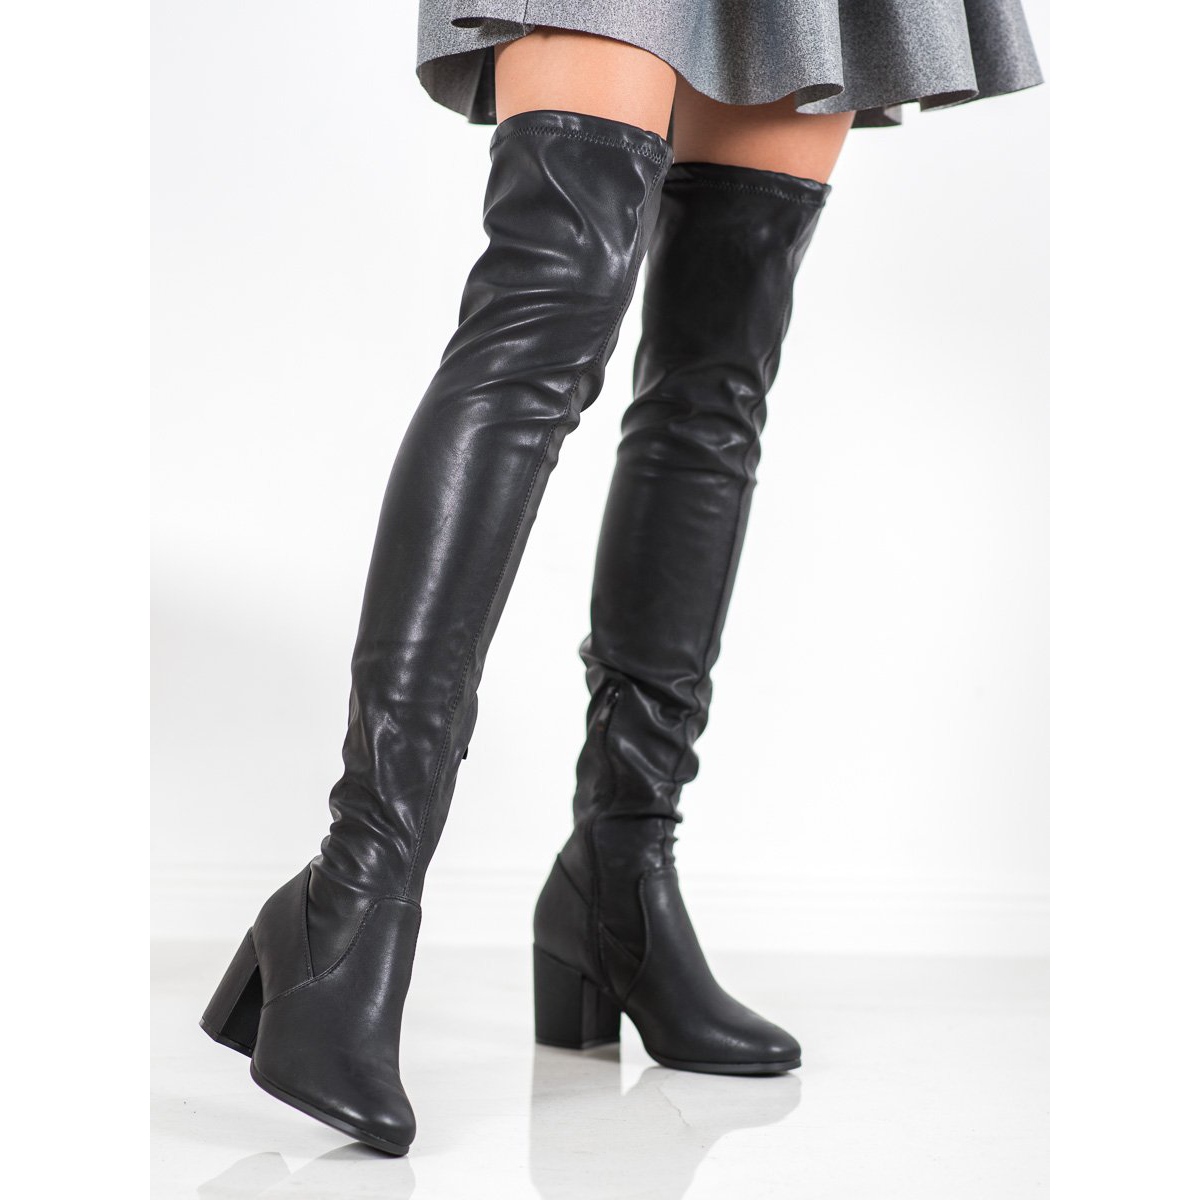 SHELOVET Over-the-knee boots made of eco leather black - KeeShoes